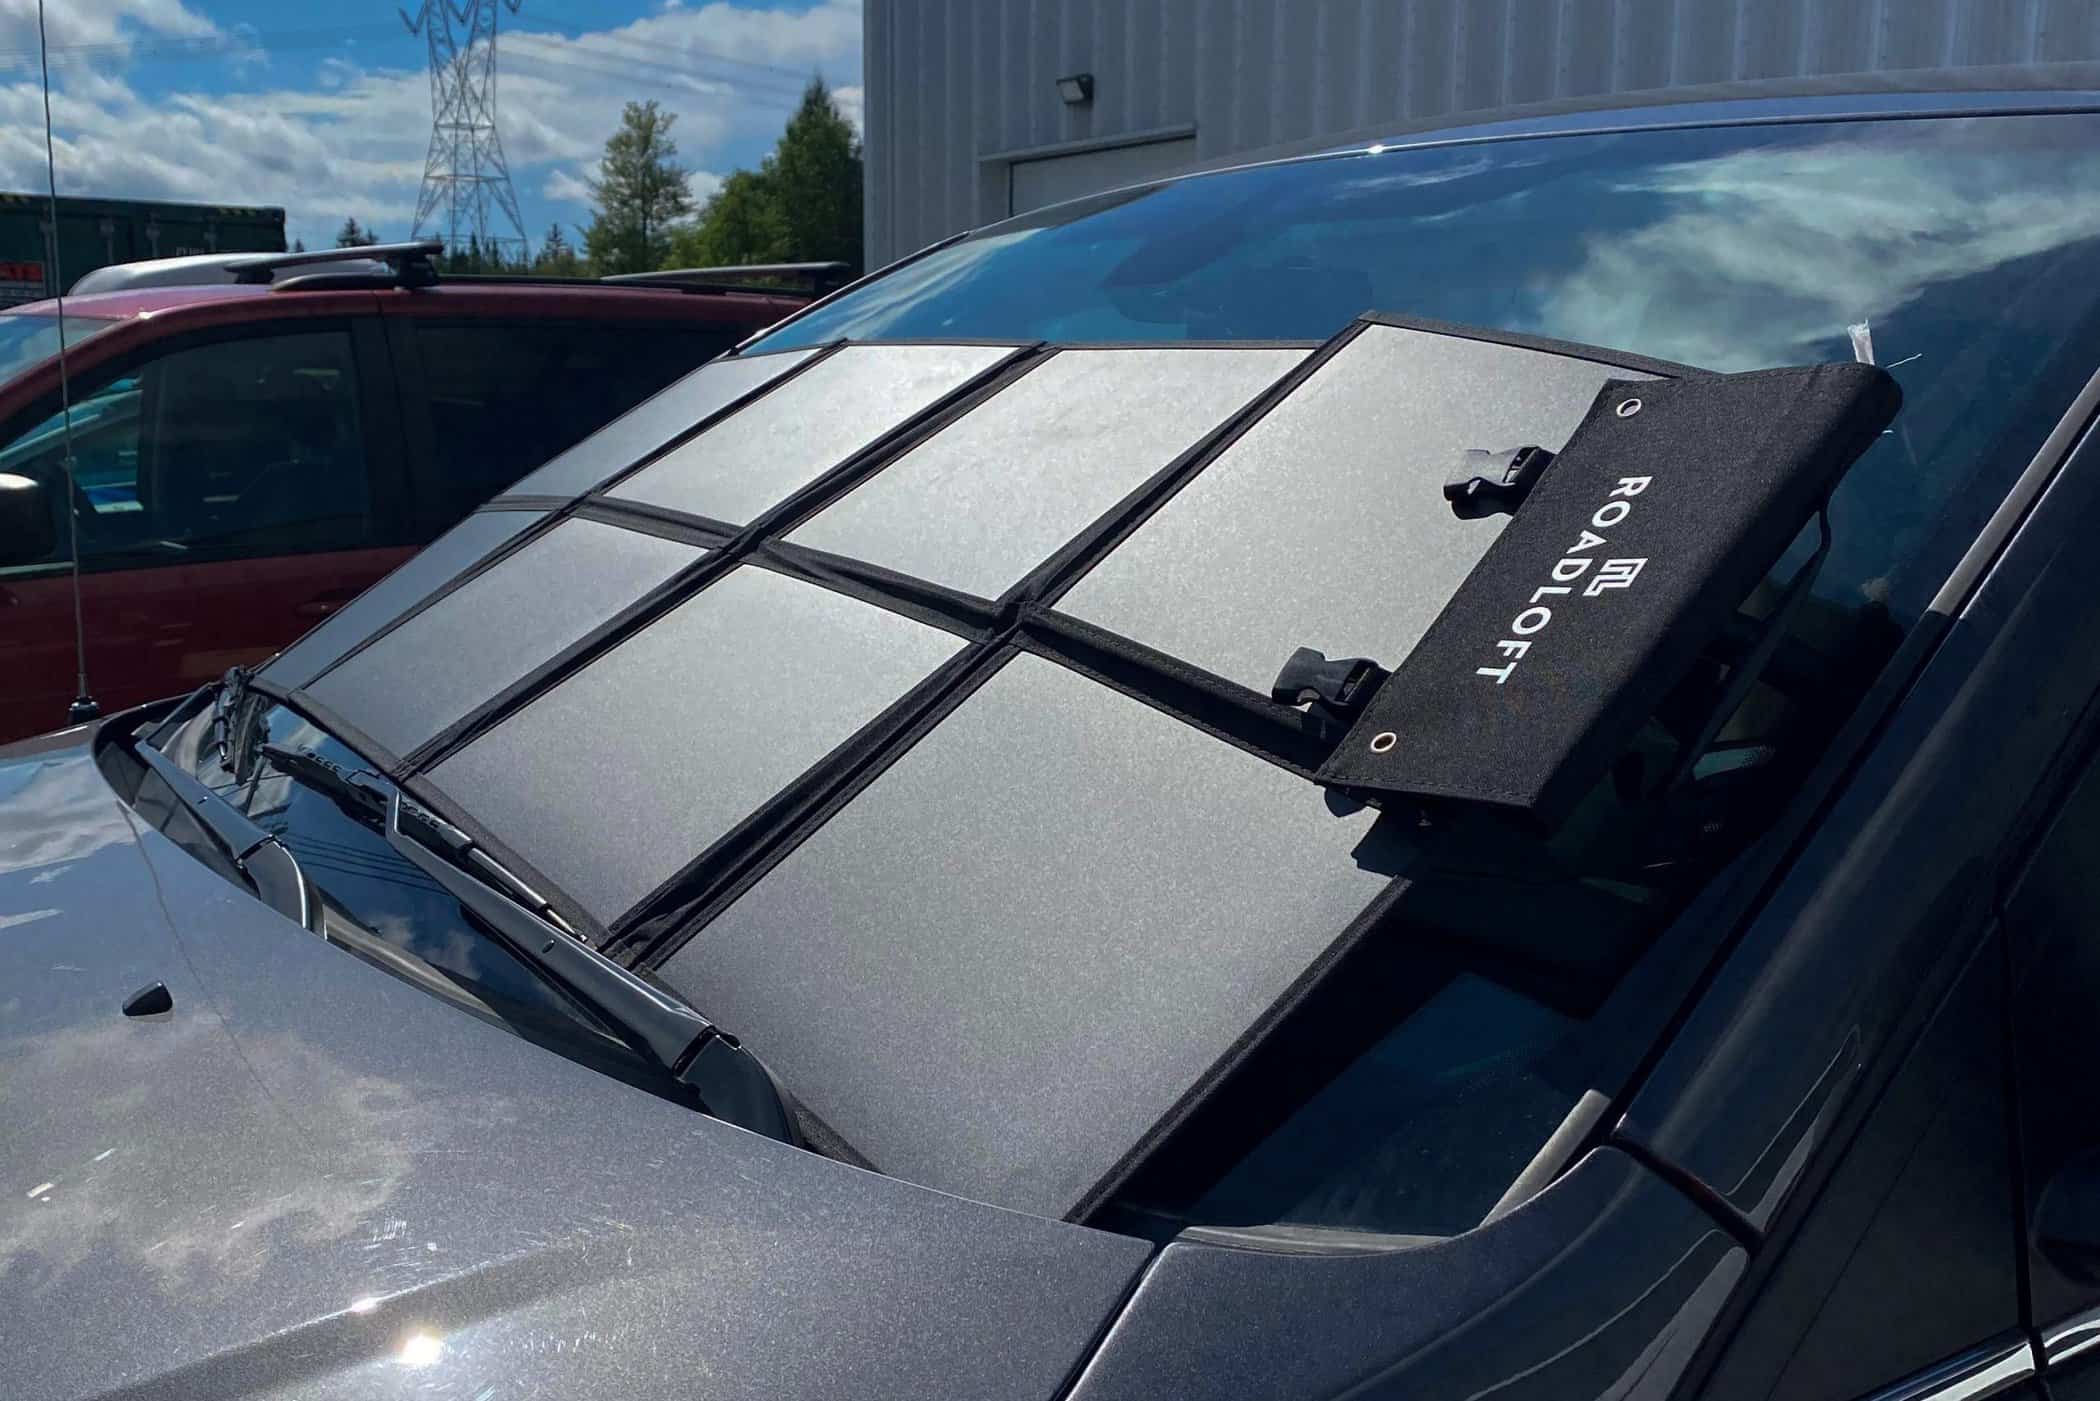 The RoadLoft foldable 125W solar panel is perfect for outdoor enthusiasts who need a reliable and portable source of power on the go. It is compact, lightweight, and can be easily carried